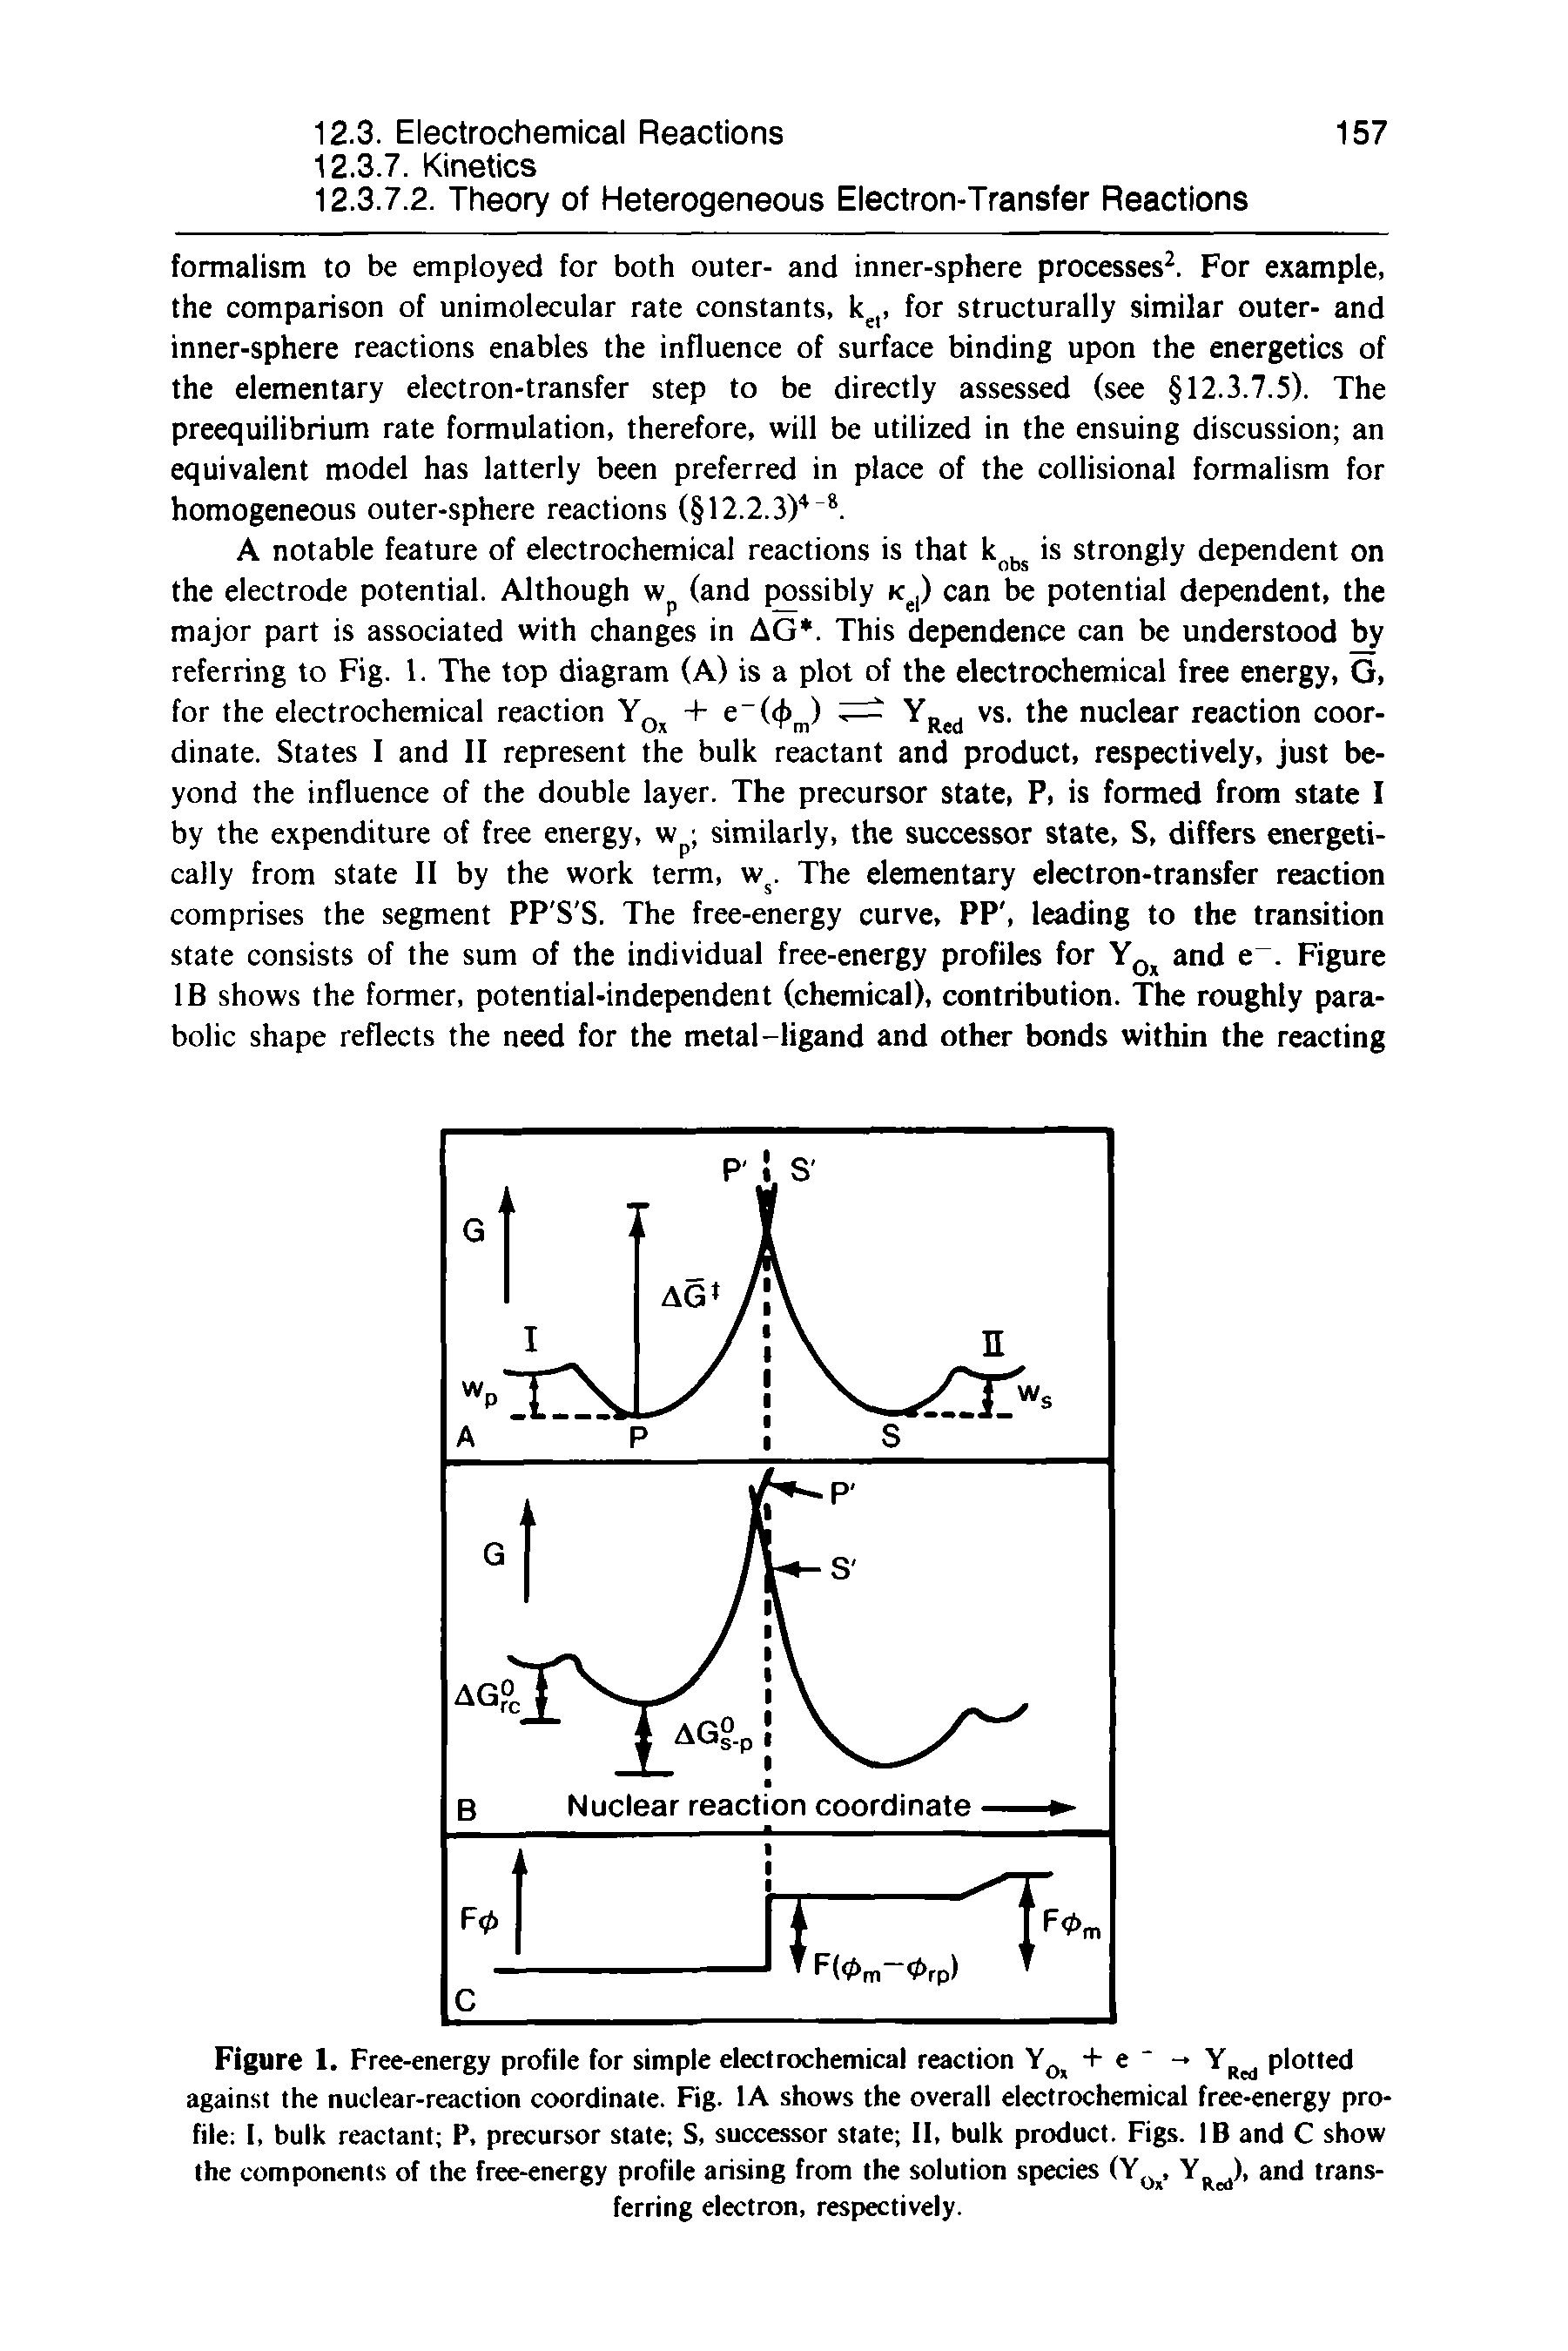 Figure 1. Free-energy profile for simple electrochemical reaction + e - Y plotted against the nuclear-reaction coordinate. Fig. lA shows the overall electrochemical free-energy profile I, bulk reactant P, precursor state S, successor state 11, bulk product. Figs. IB and C show the components of the free-energy profile arising from the solution species (Y, Y ), and transferring electron, respectively.